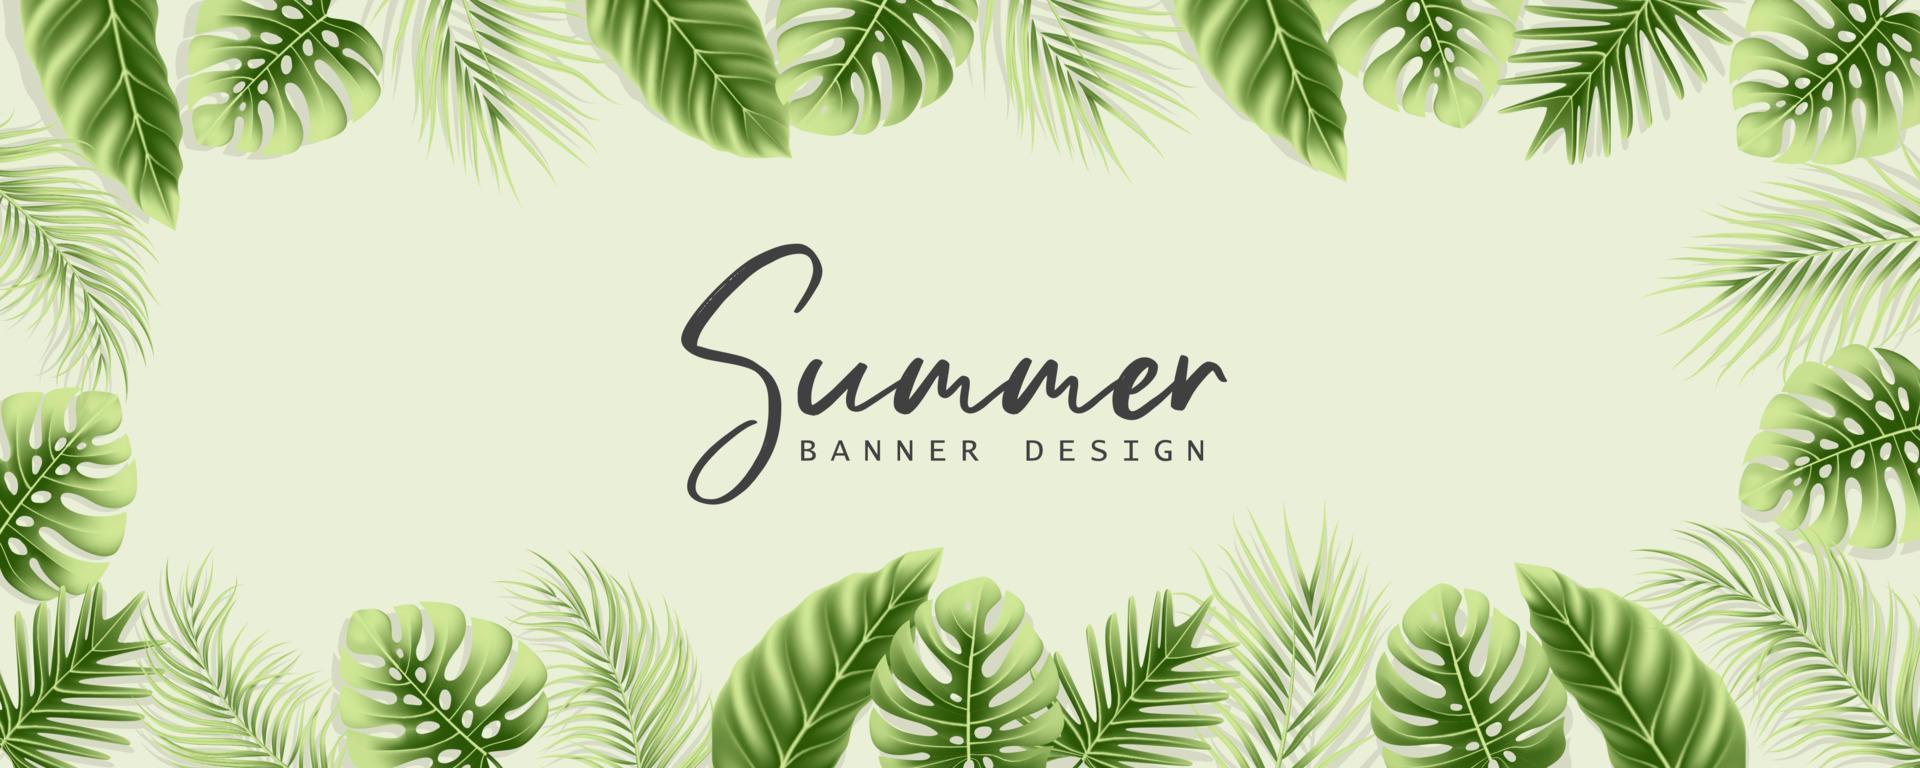 Elegant summer banner with realistic tropical leaves vector